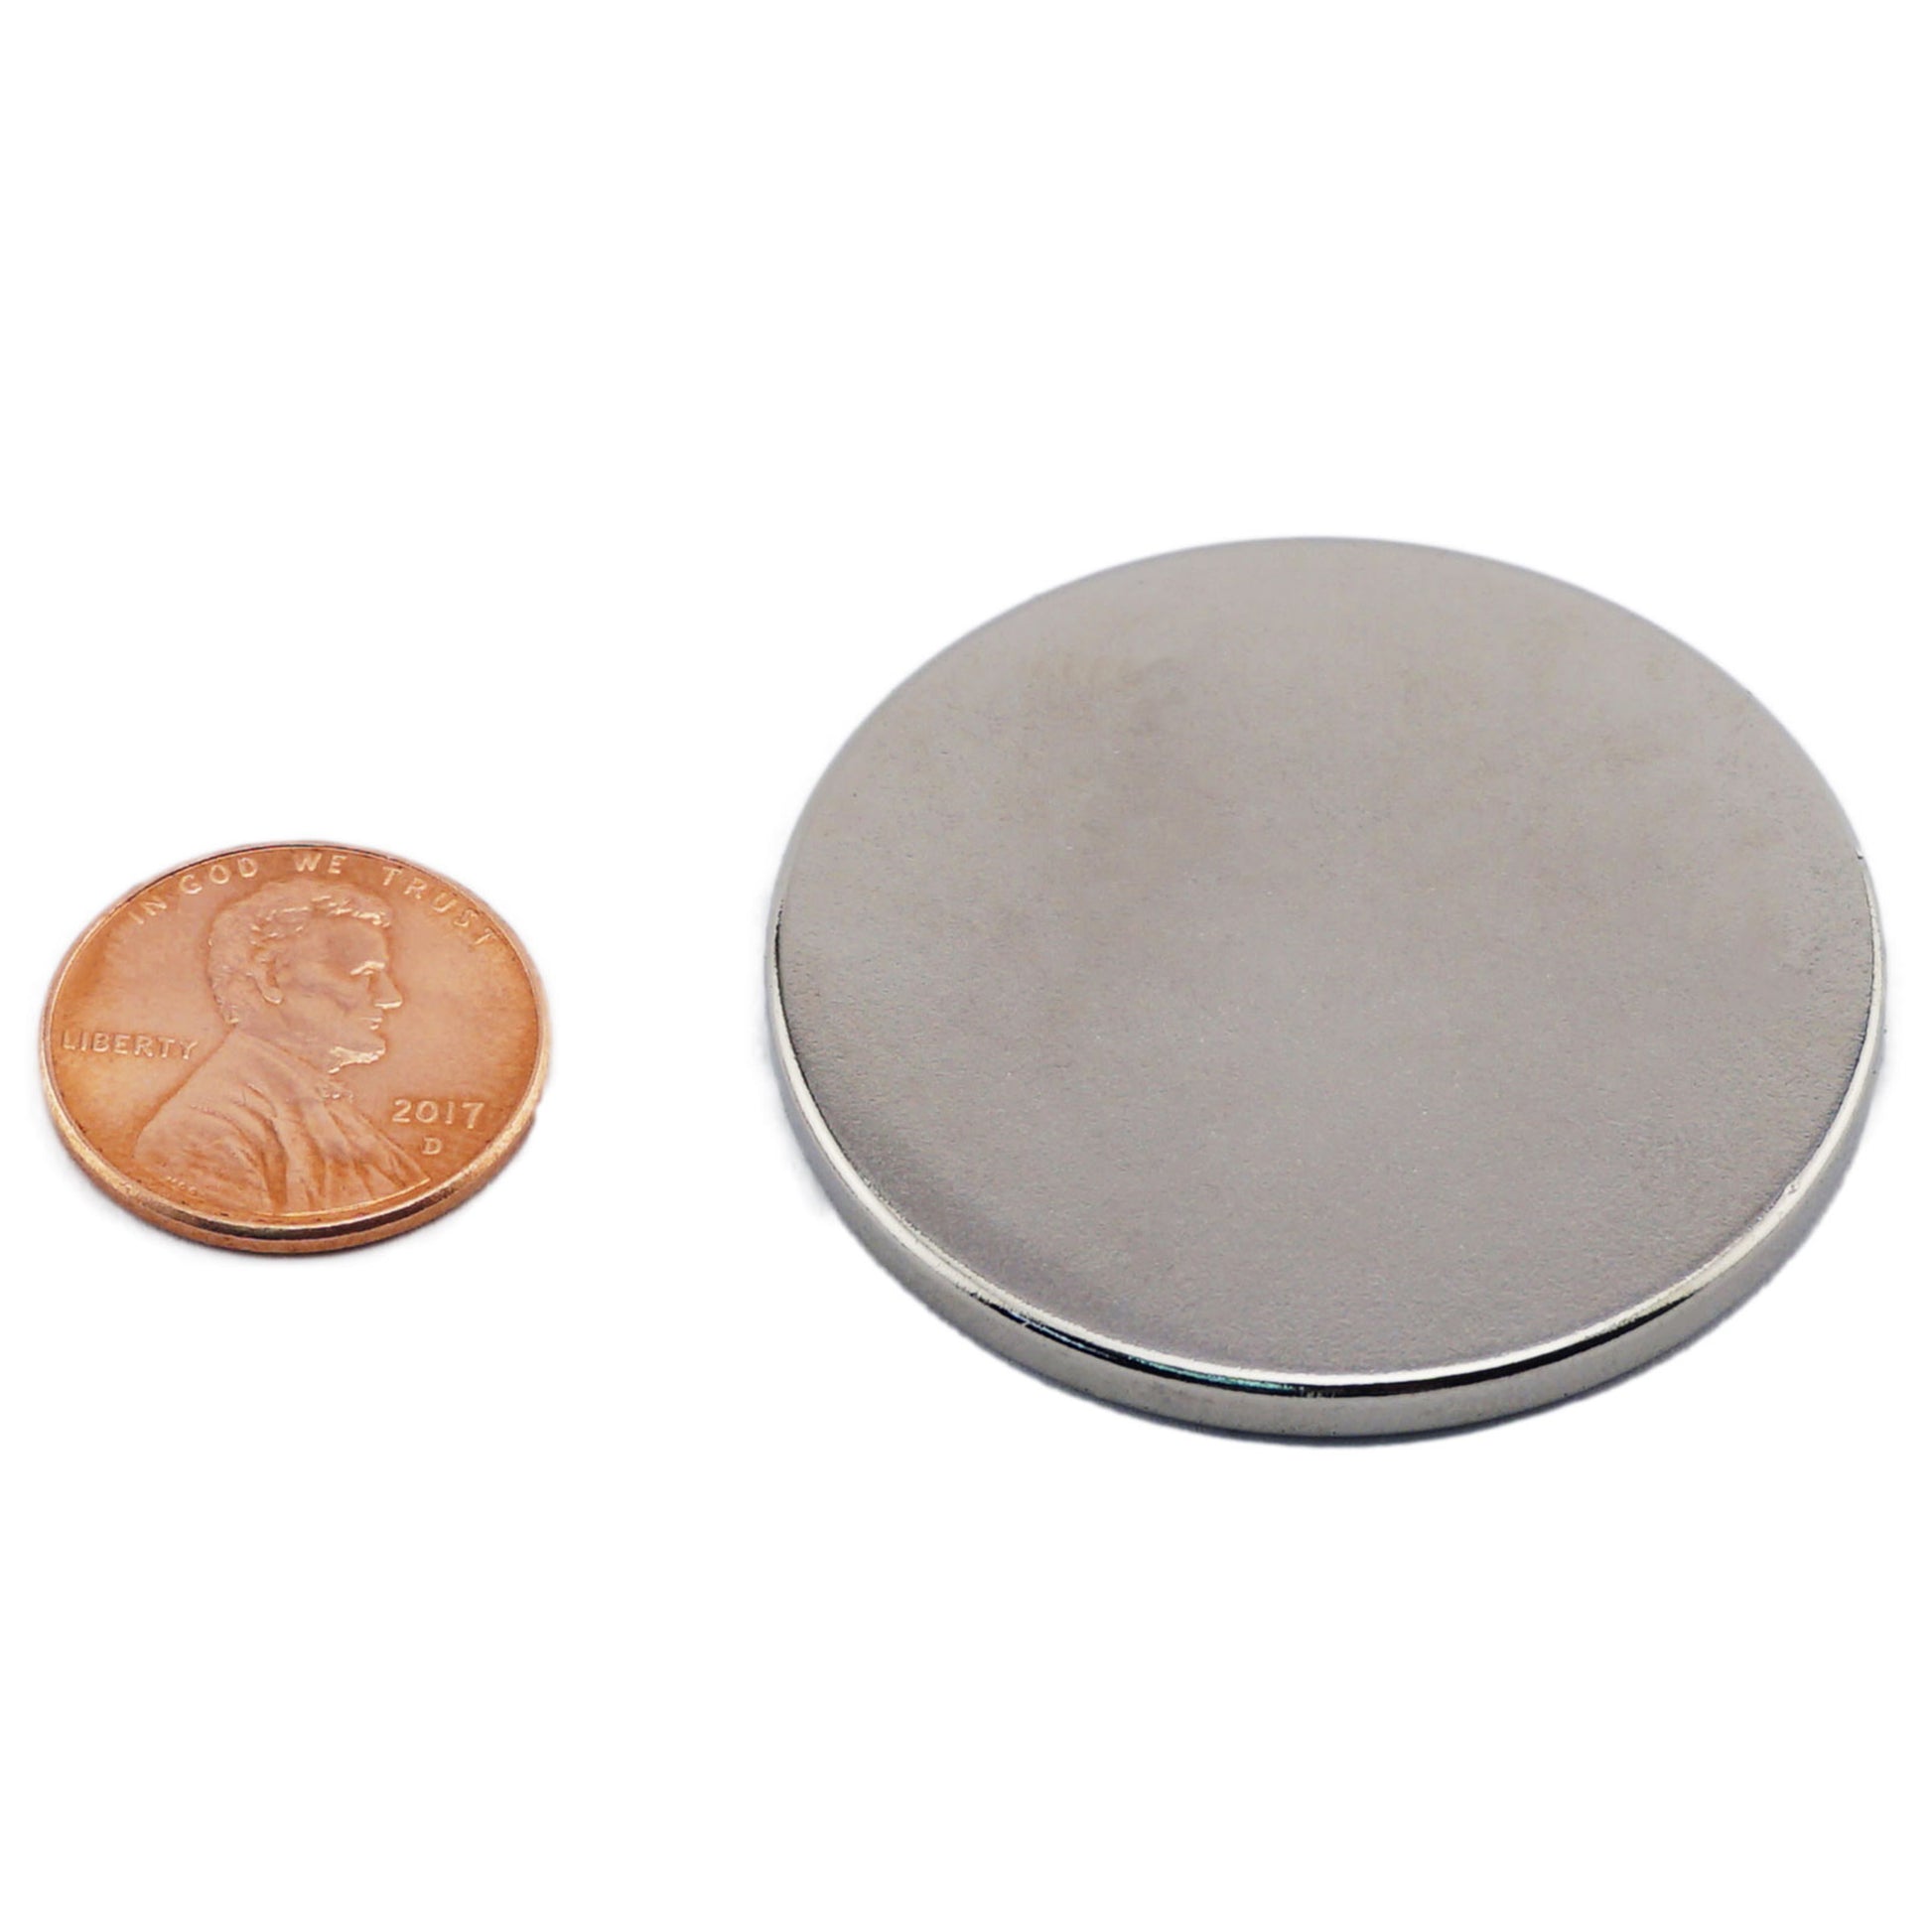 Load image into Gallery viewer, ND008709N Neodymium Disc Magnet - Compared to Penny for Size Reference